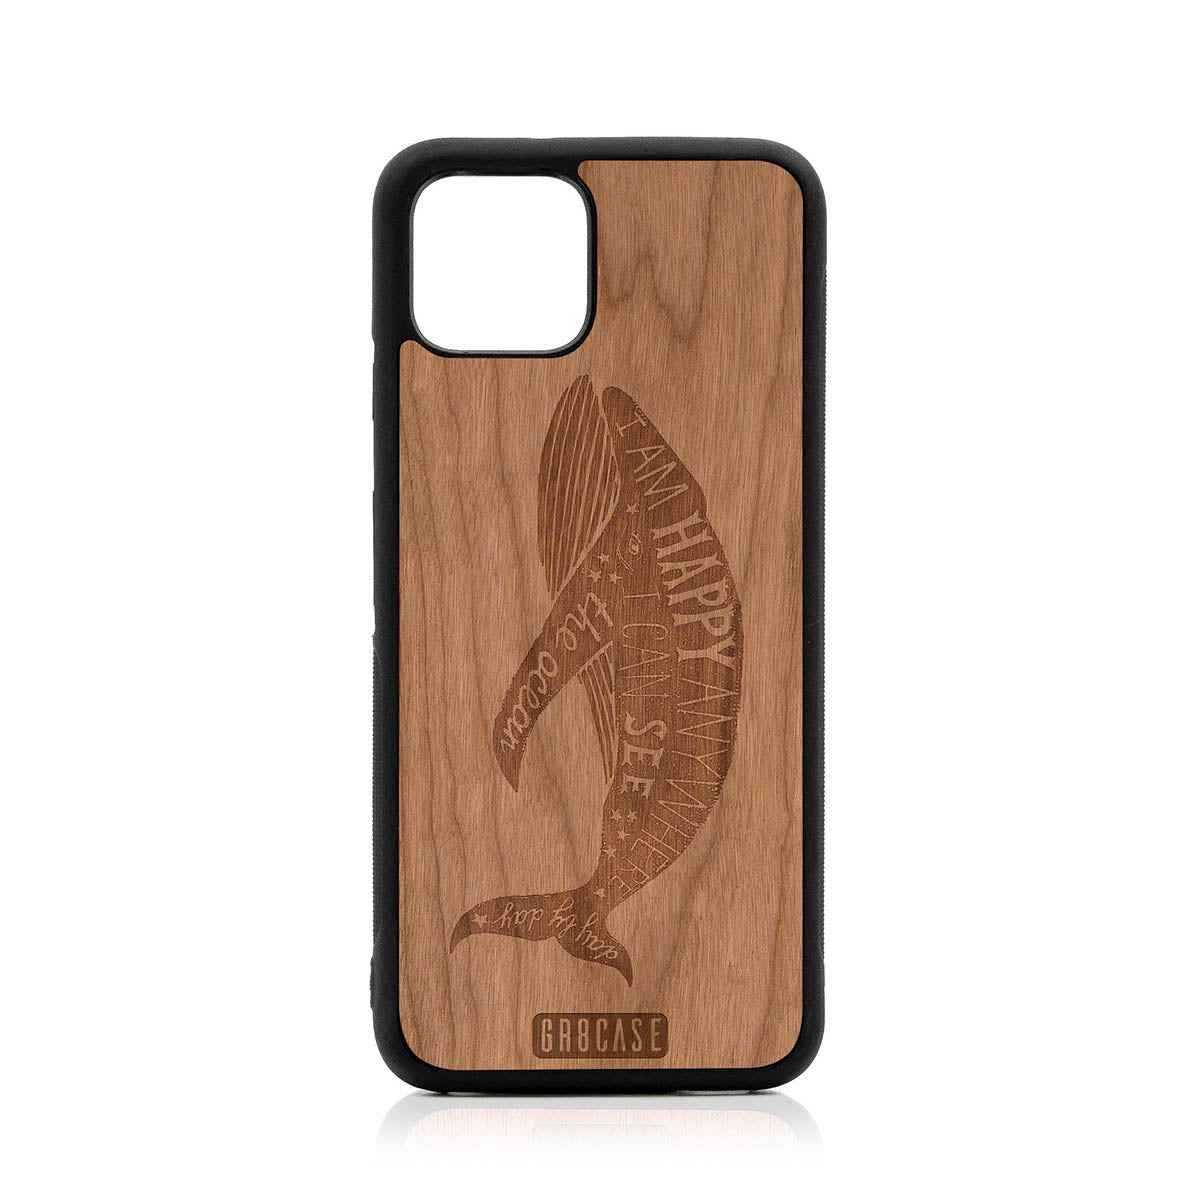 I'm Happy Anywhere I Can See The Ocean (Whale) Design Wood Case For Google Pixel 4